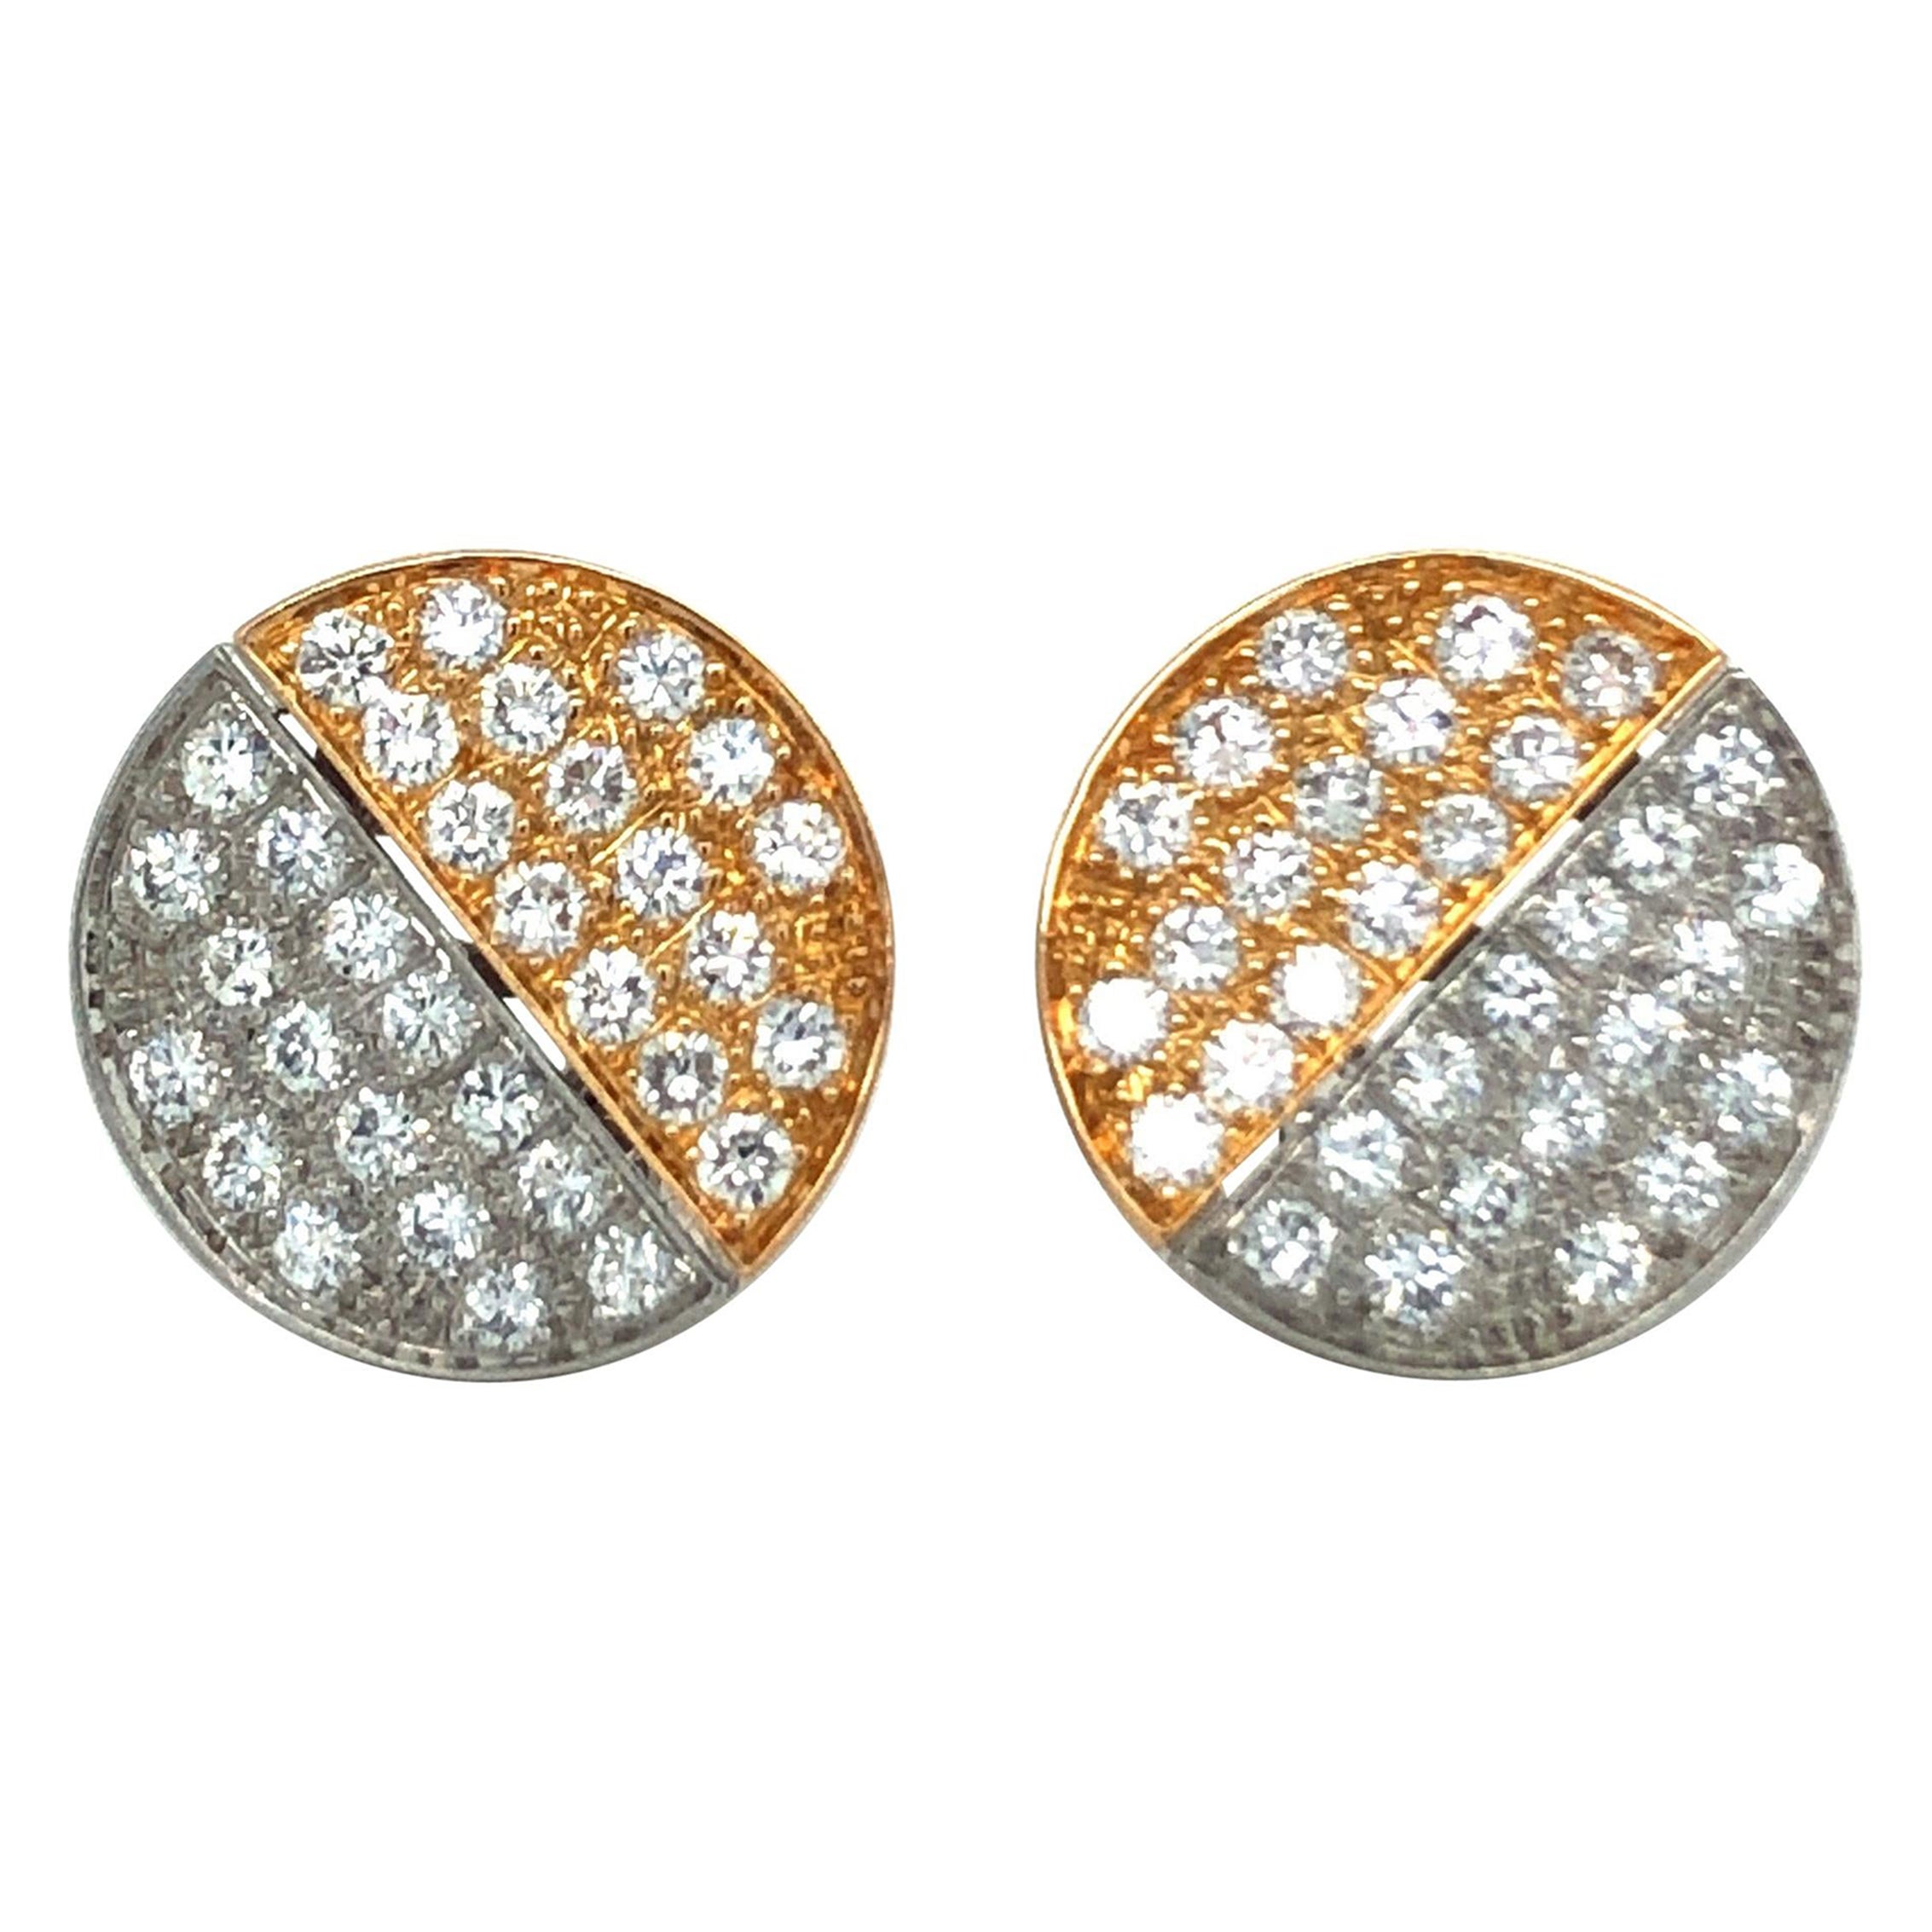 18 Karat Bi-Color Gold and Round-Cut Diamonds Ear Clips by Binder